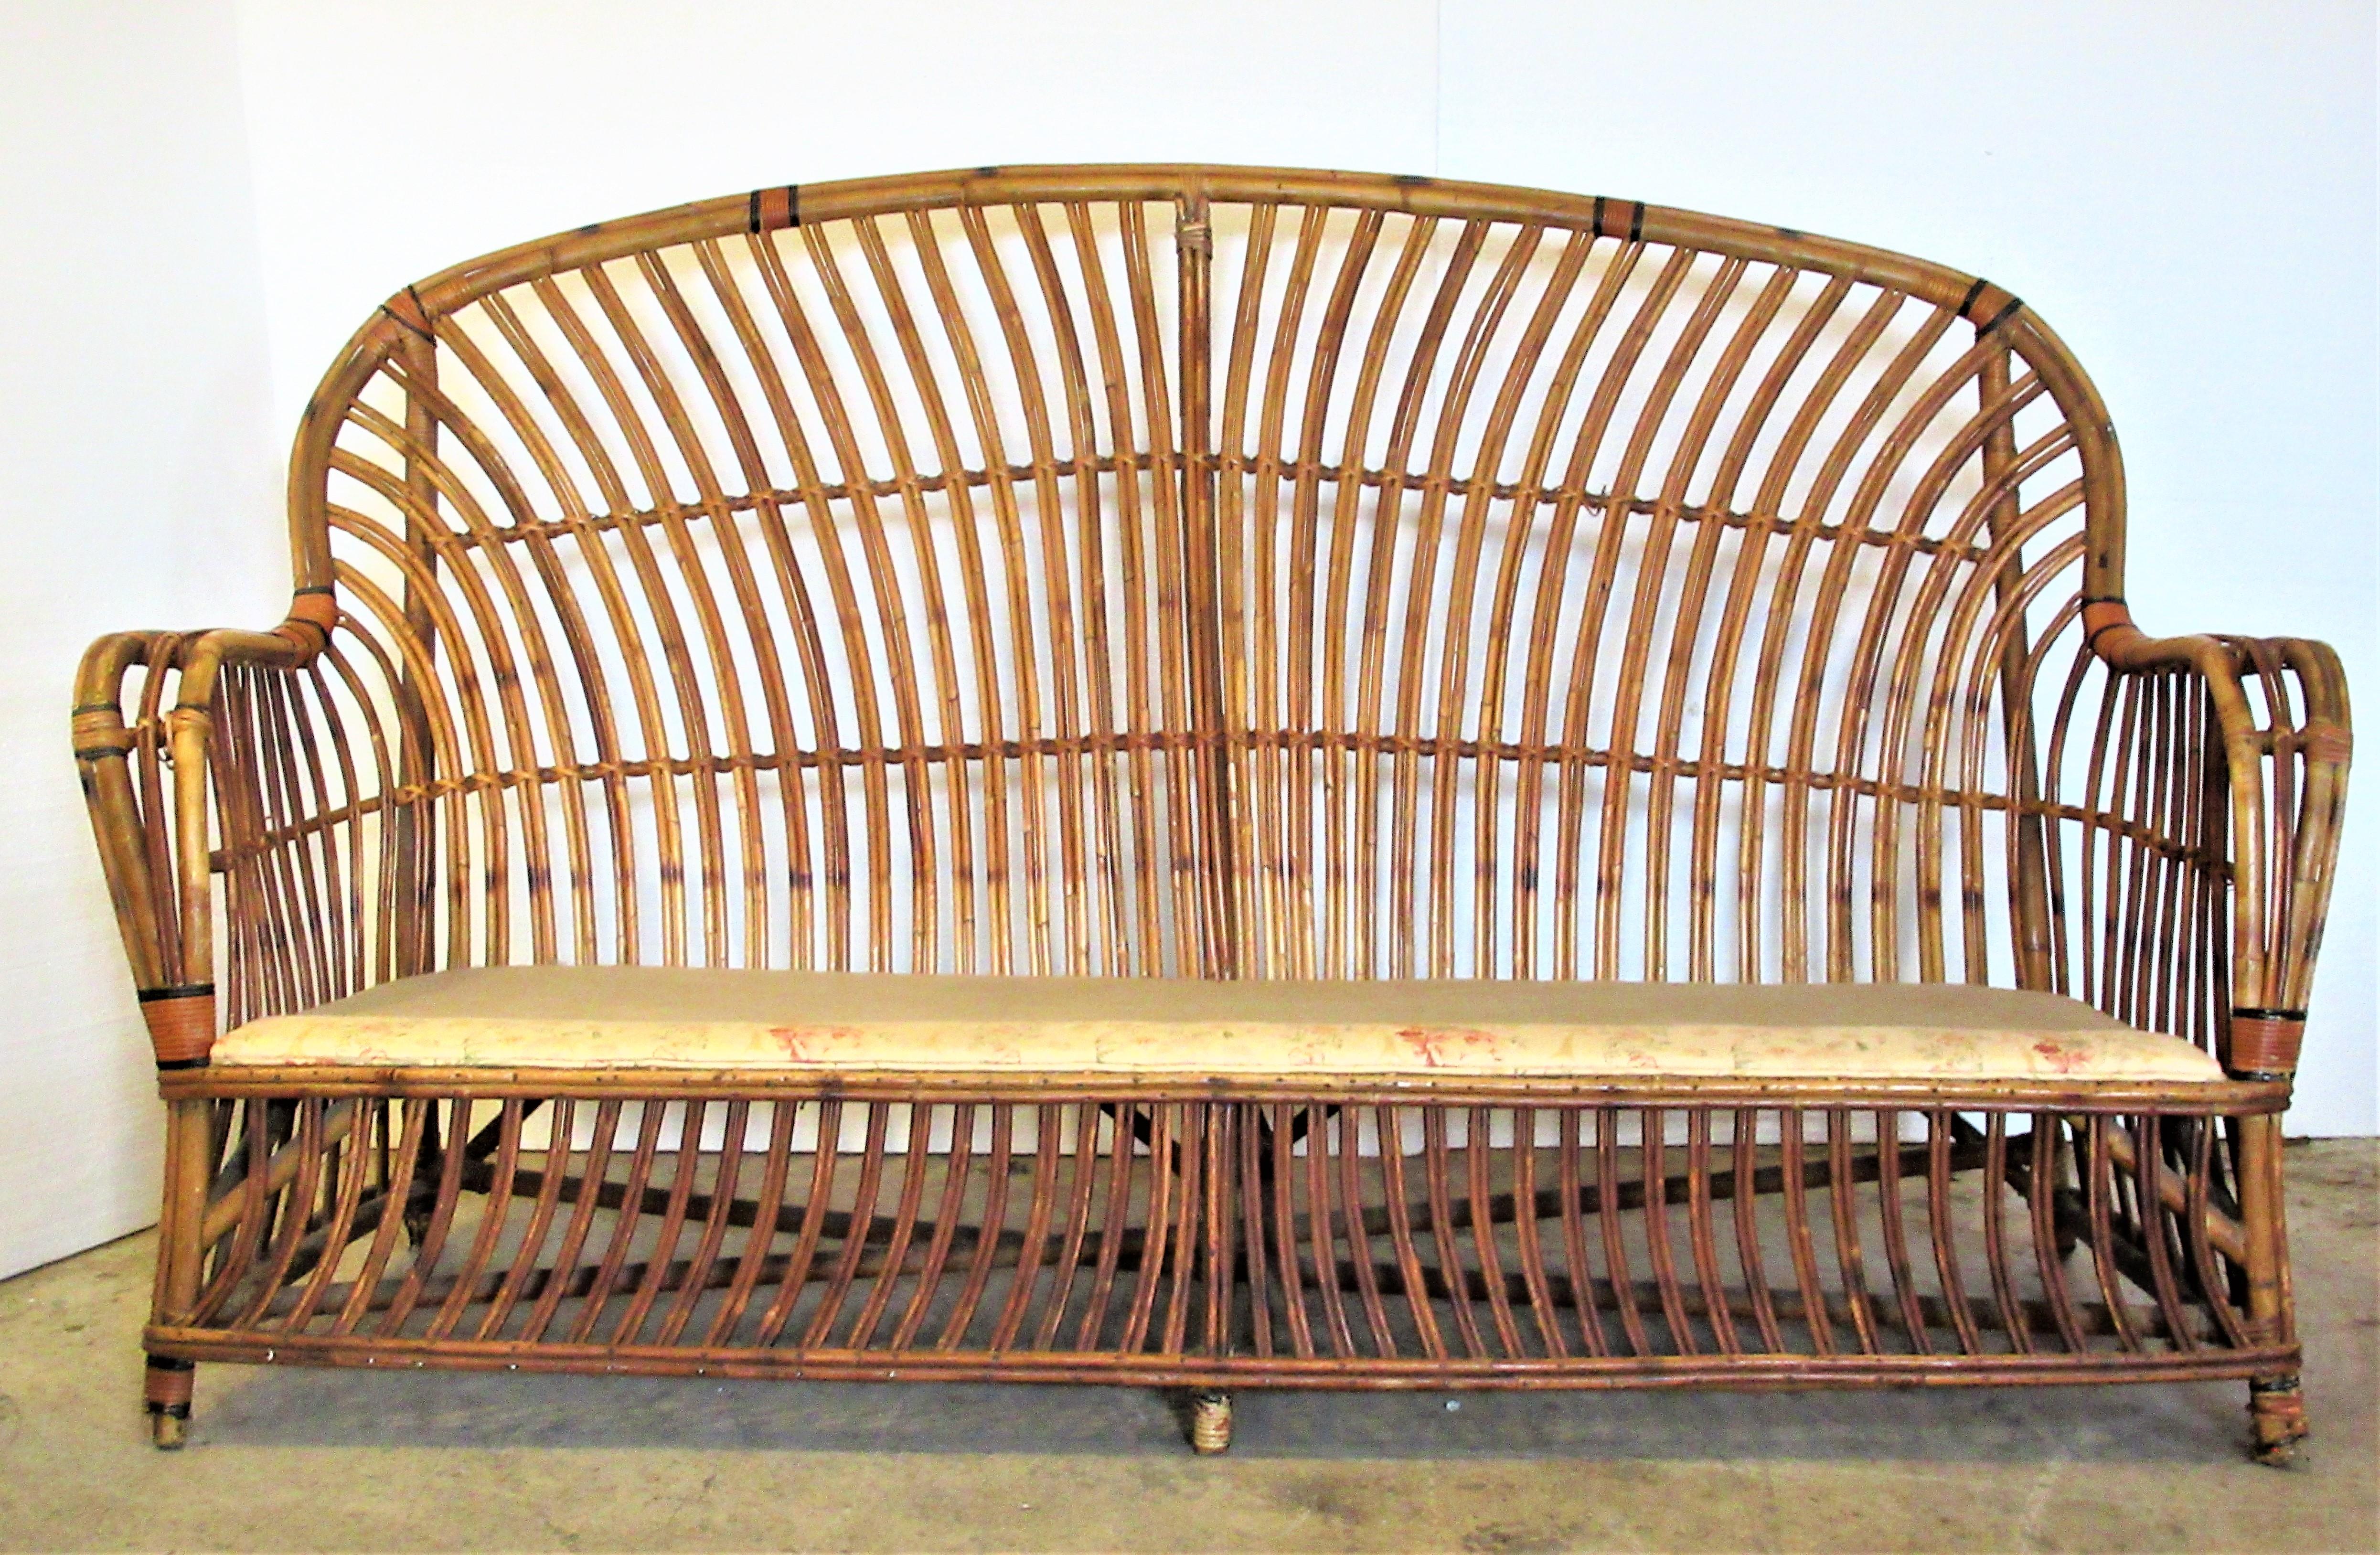 Antique stick wicker reed rattan sofa in original all-over beautifully aged glowing natural finish. American 1930s transitional Arts & Crafts - Art Deco design. Attributed to Heywood - Wakefield. Look at all pictures and read condition report in